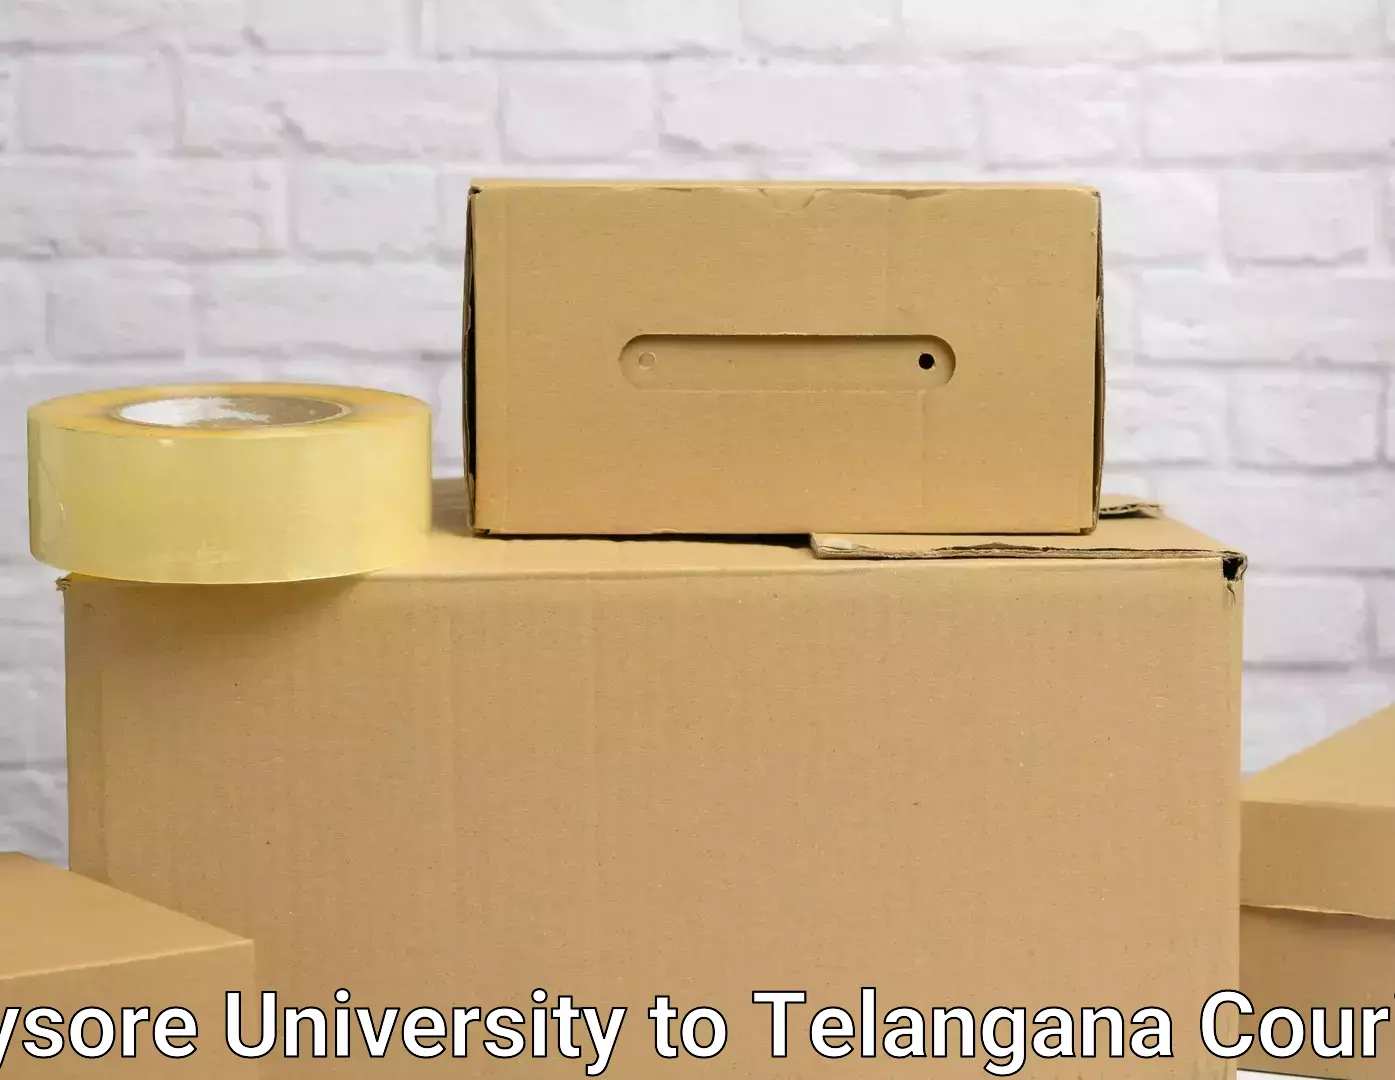 Reliable furniture transport Mysore University to International Institute of Information Technology Hyderabad